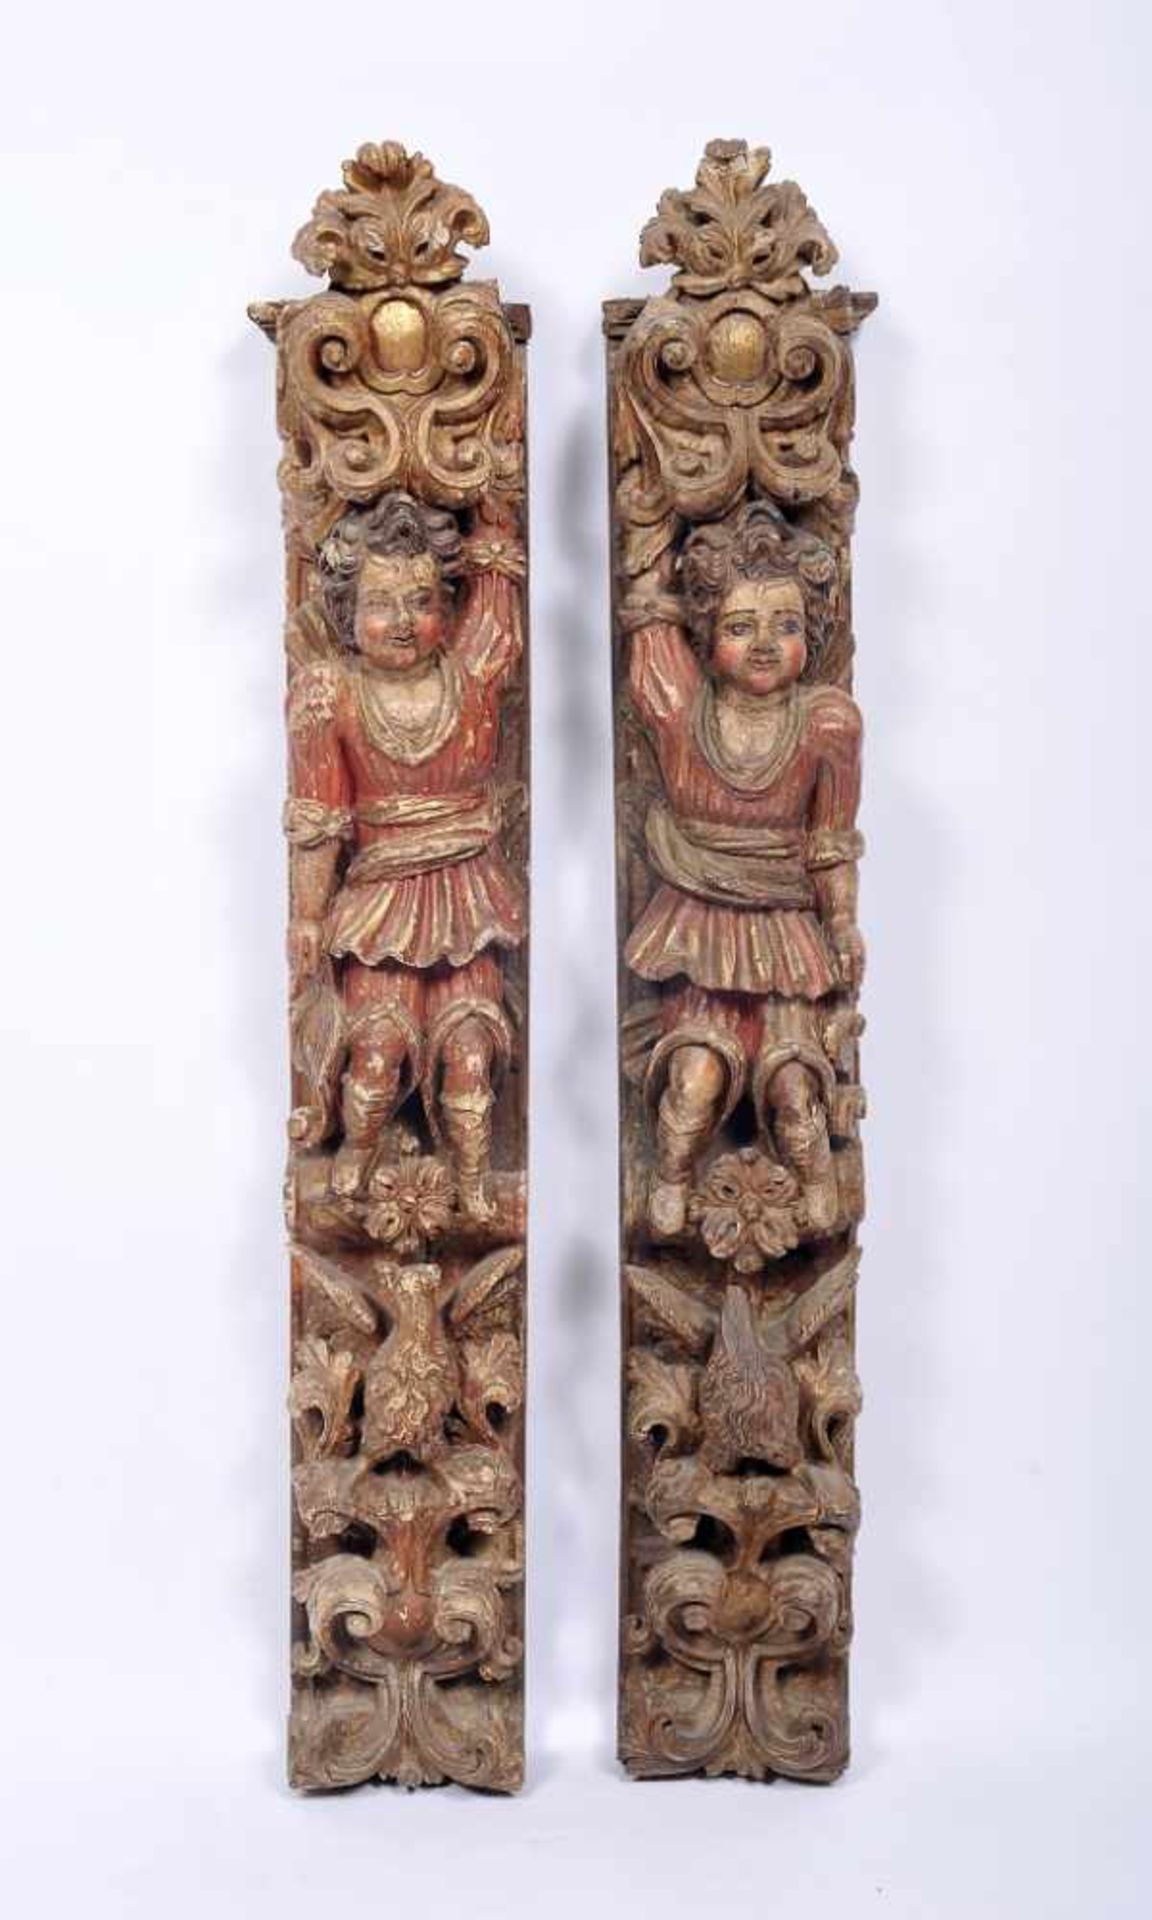 Seraphim and eaglesSeraphim and eagles, Baroque, a pair of carved, painted and gilt wooden